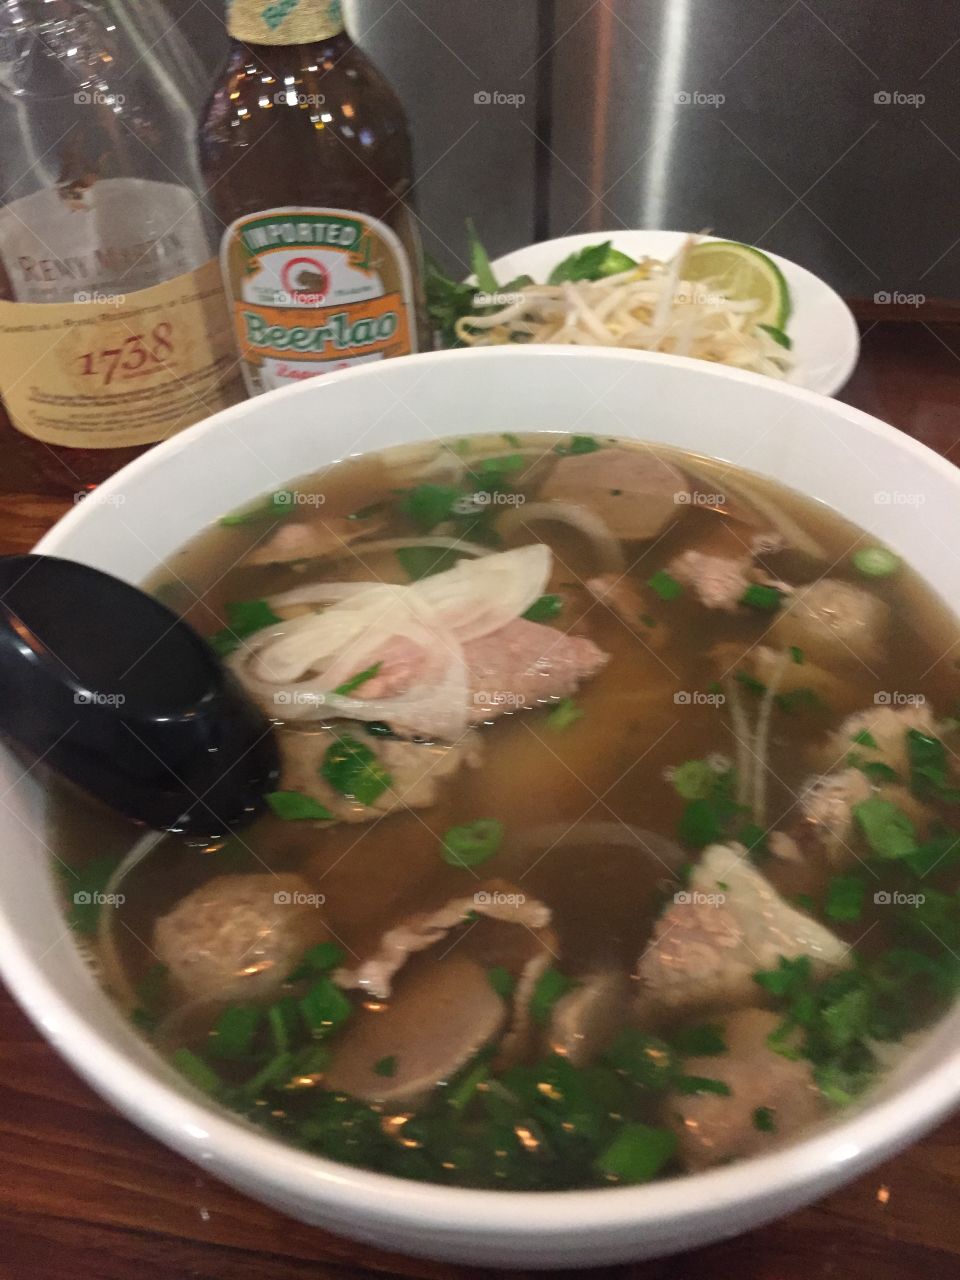 Pho
BeerLao
Remy 1738